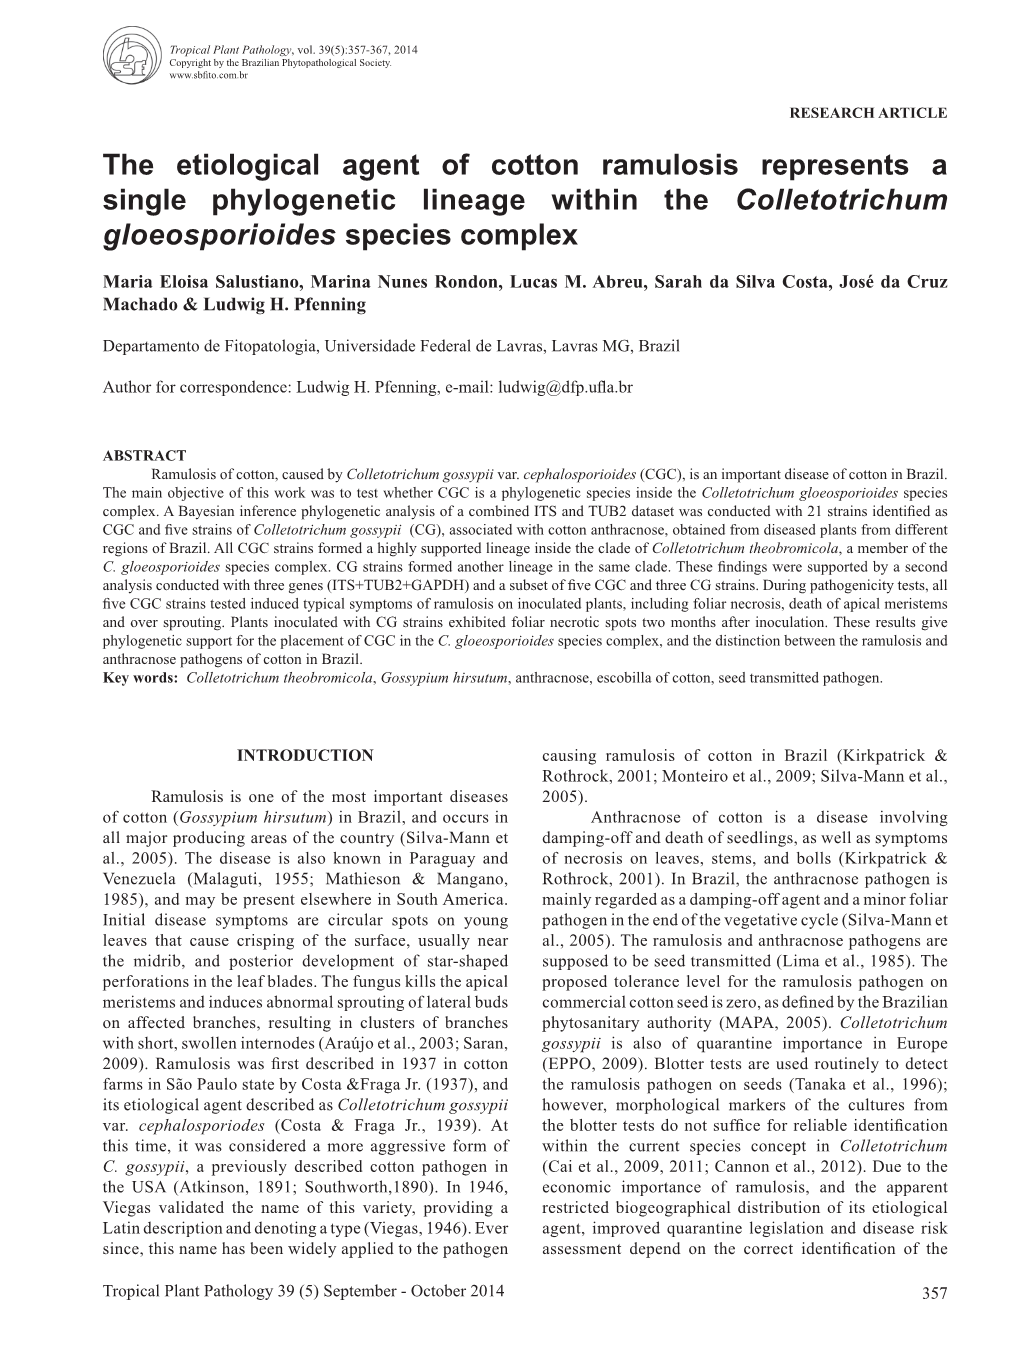 The Etiological Agent of Cotton Ramulosis Represents a Single Phylogenetic Lineage Within the Colletotrichum Gloeosporioides Species Complex